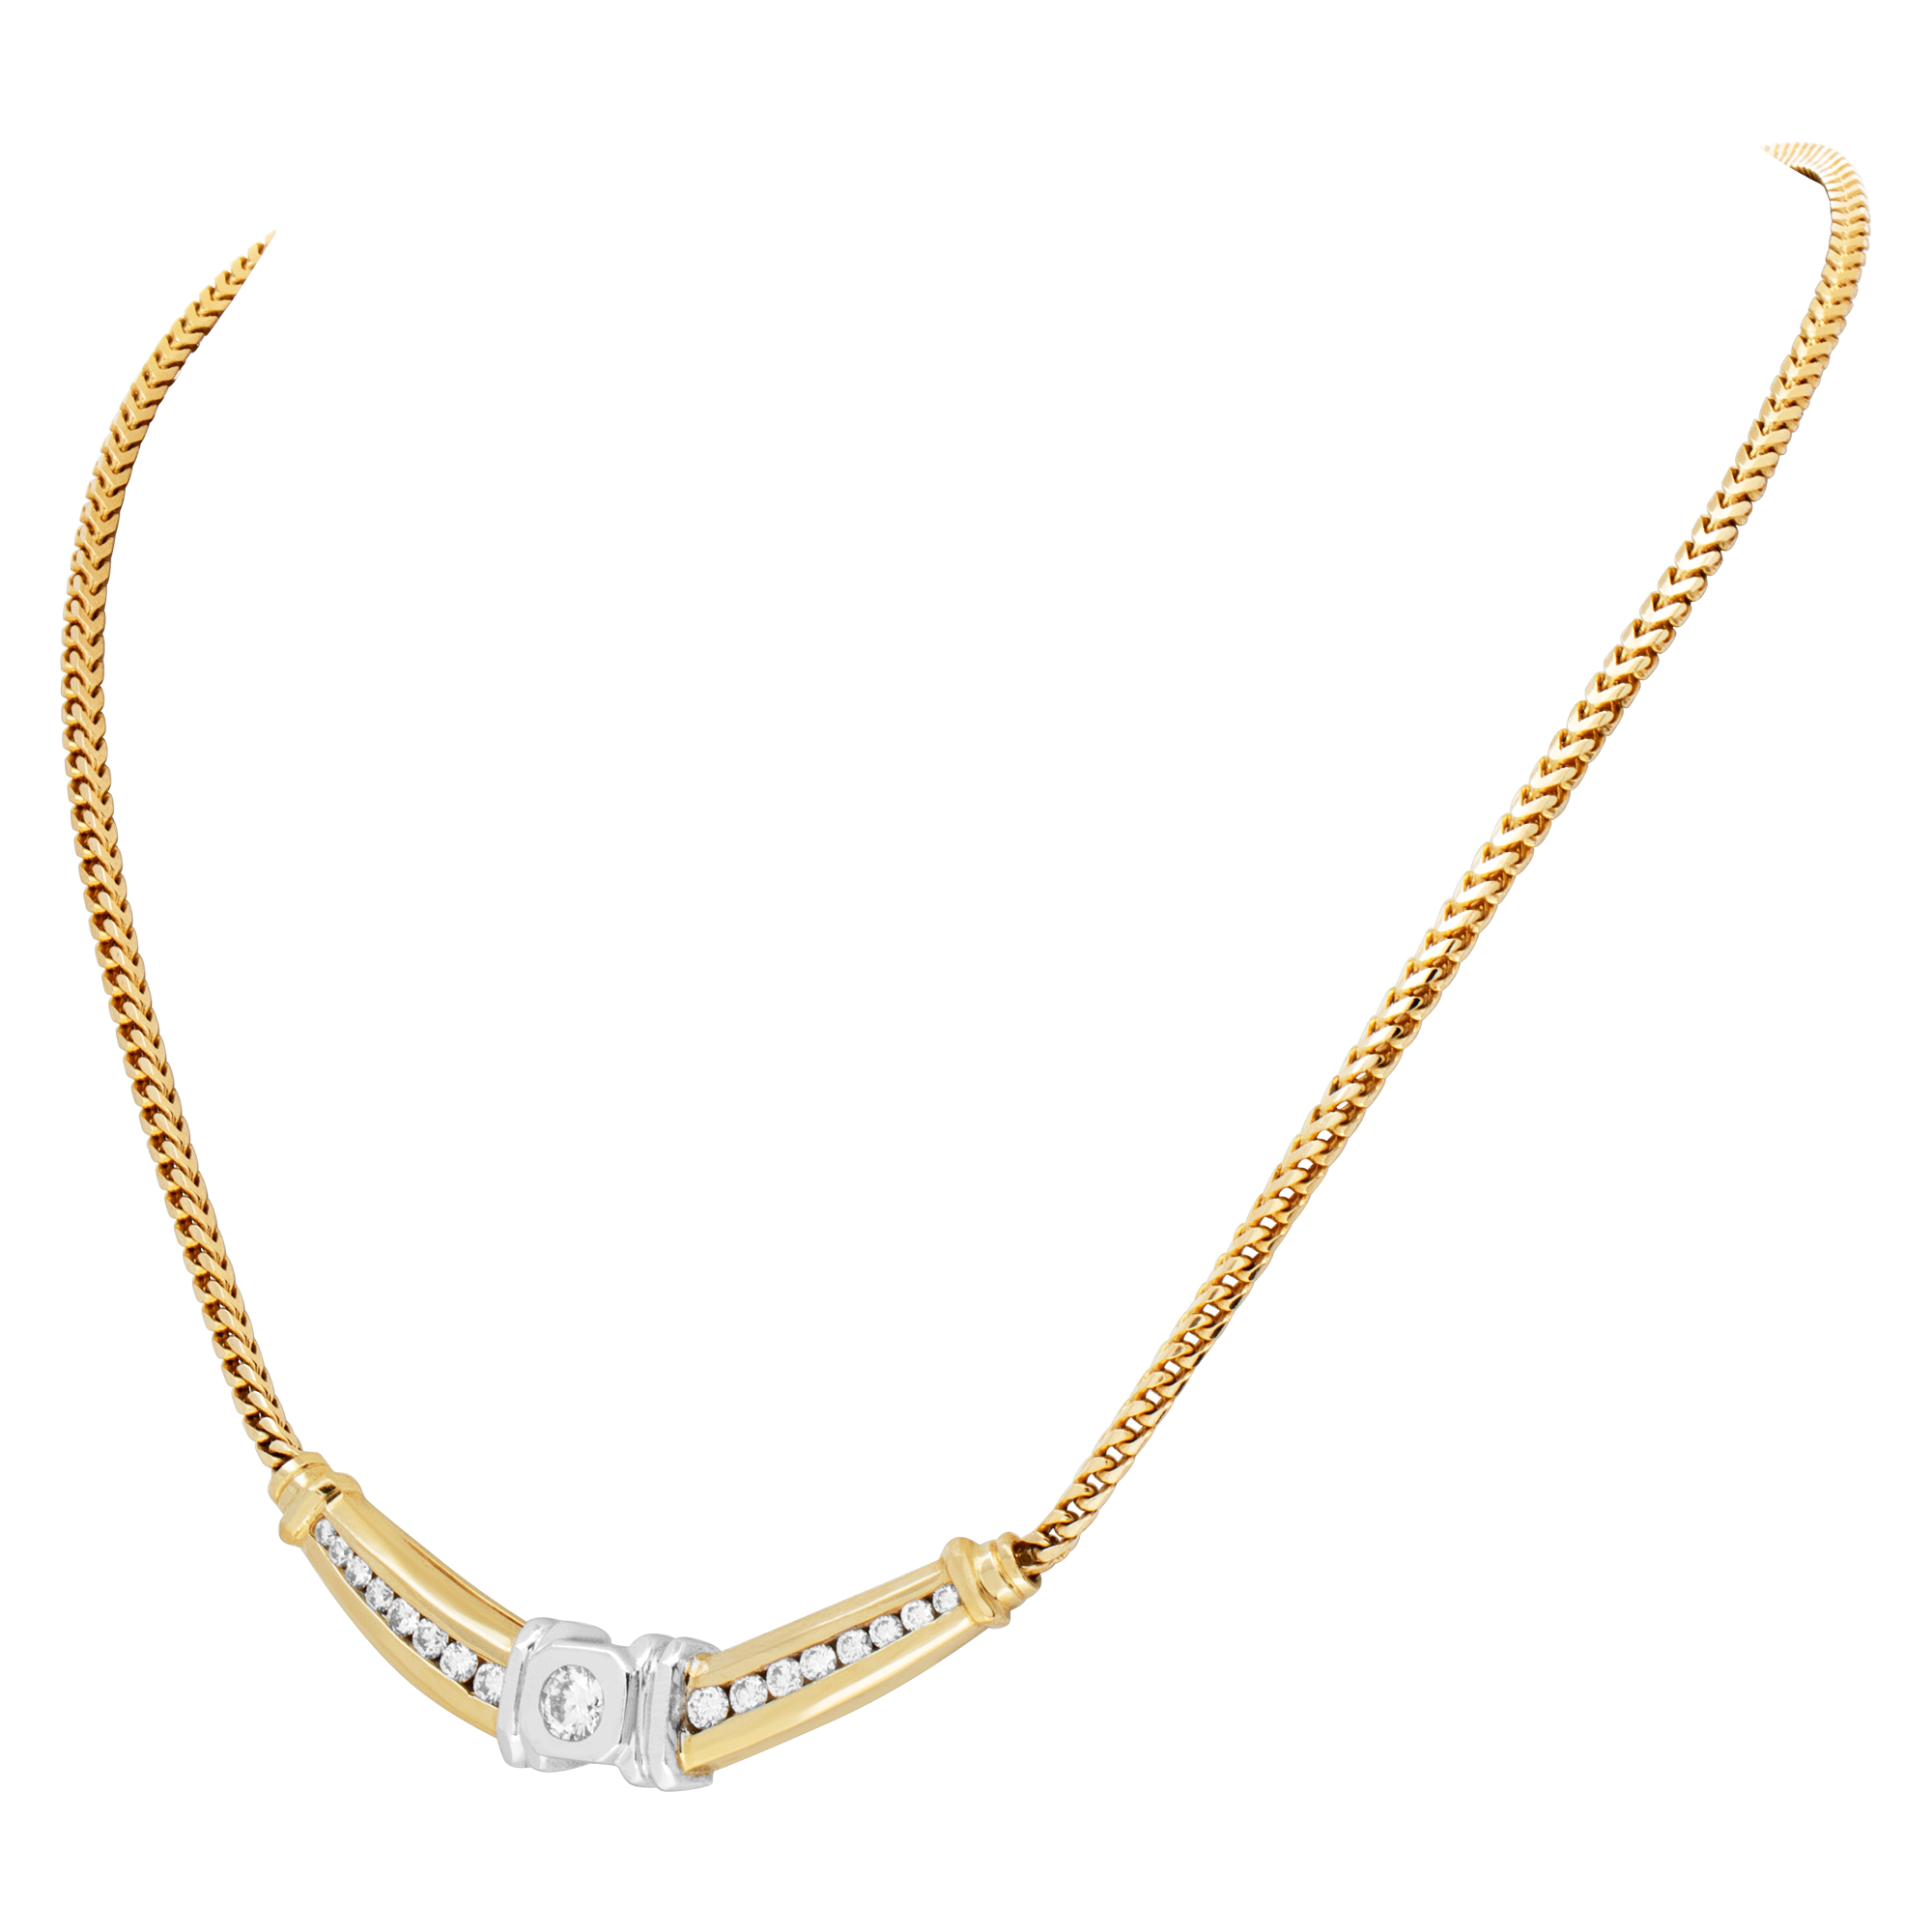 Lovely Diamond Chain Necklace In 14k Yellow And White Gold. image 4